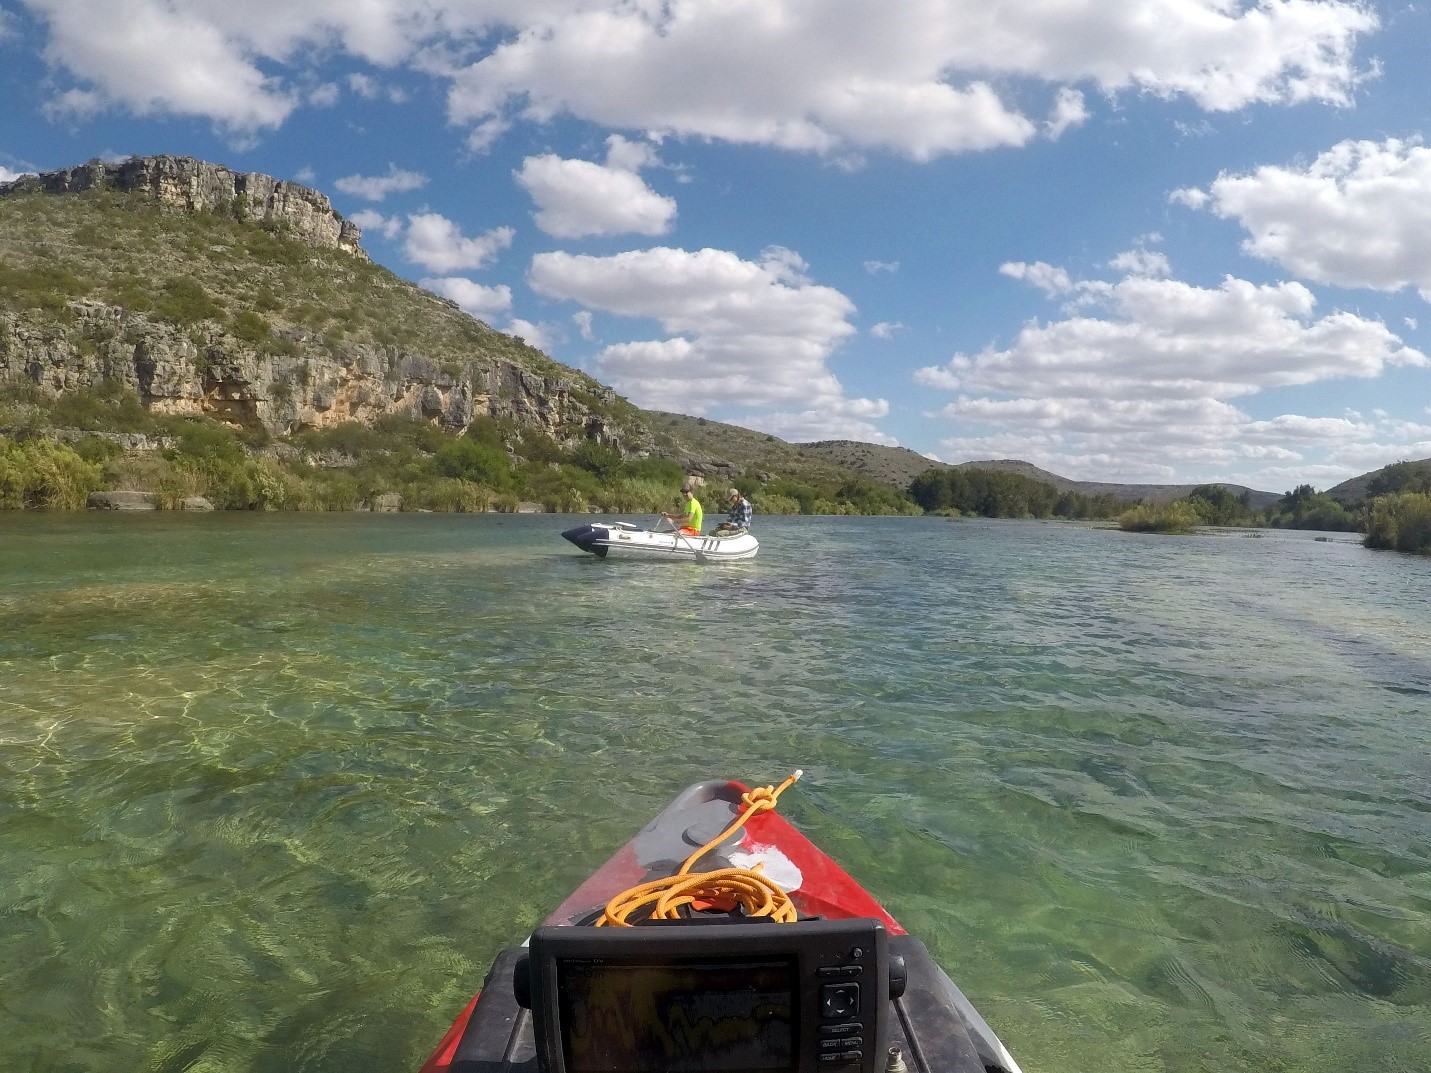 Devils River survey with a ground penetrating radar and a sonar